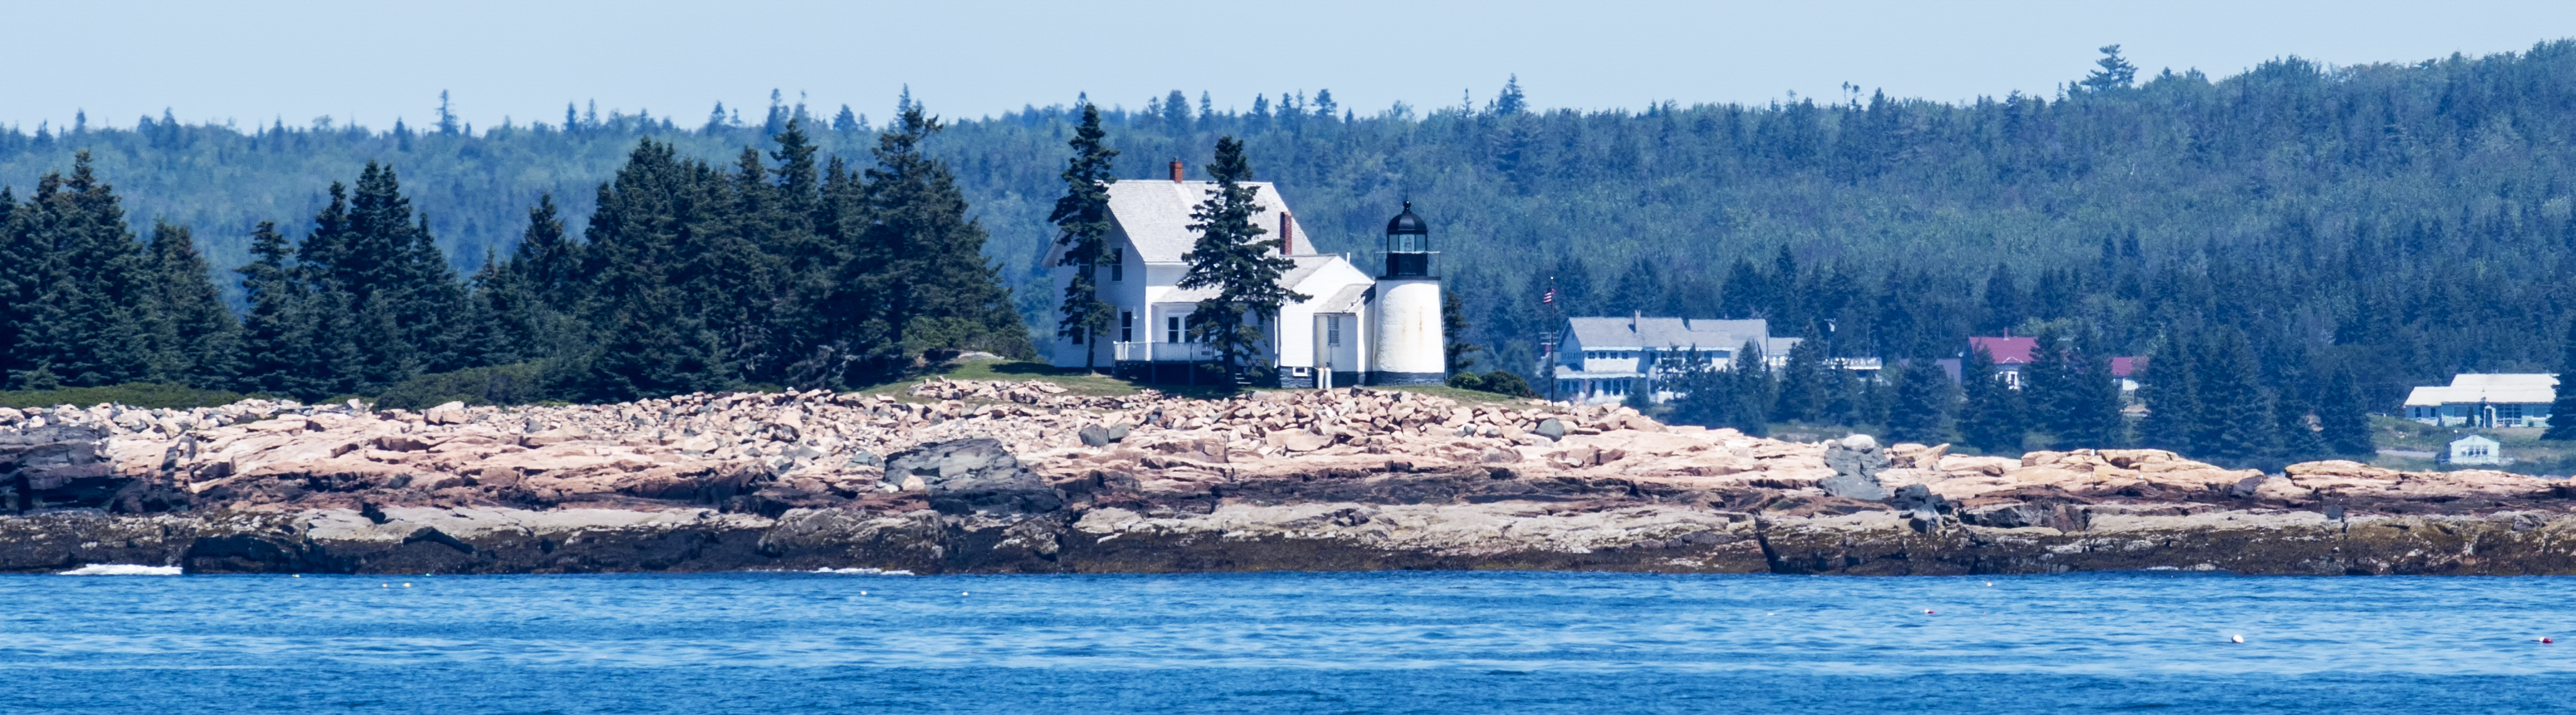 Underrated Places to Visit in the US - White Harbor Light Station on the Schoodic Peninsula in Maine